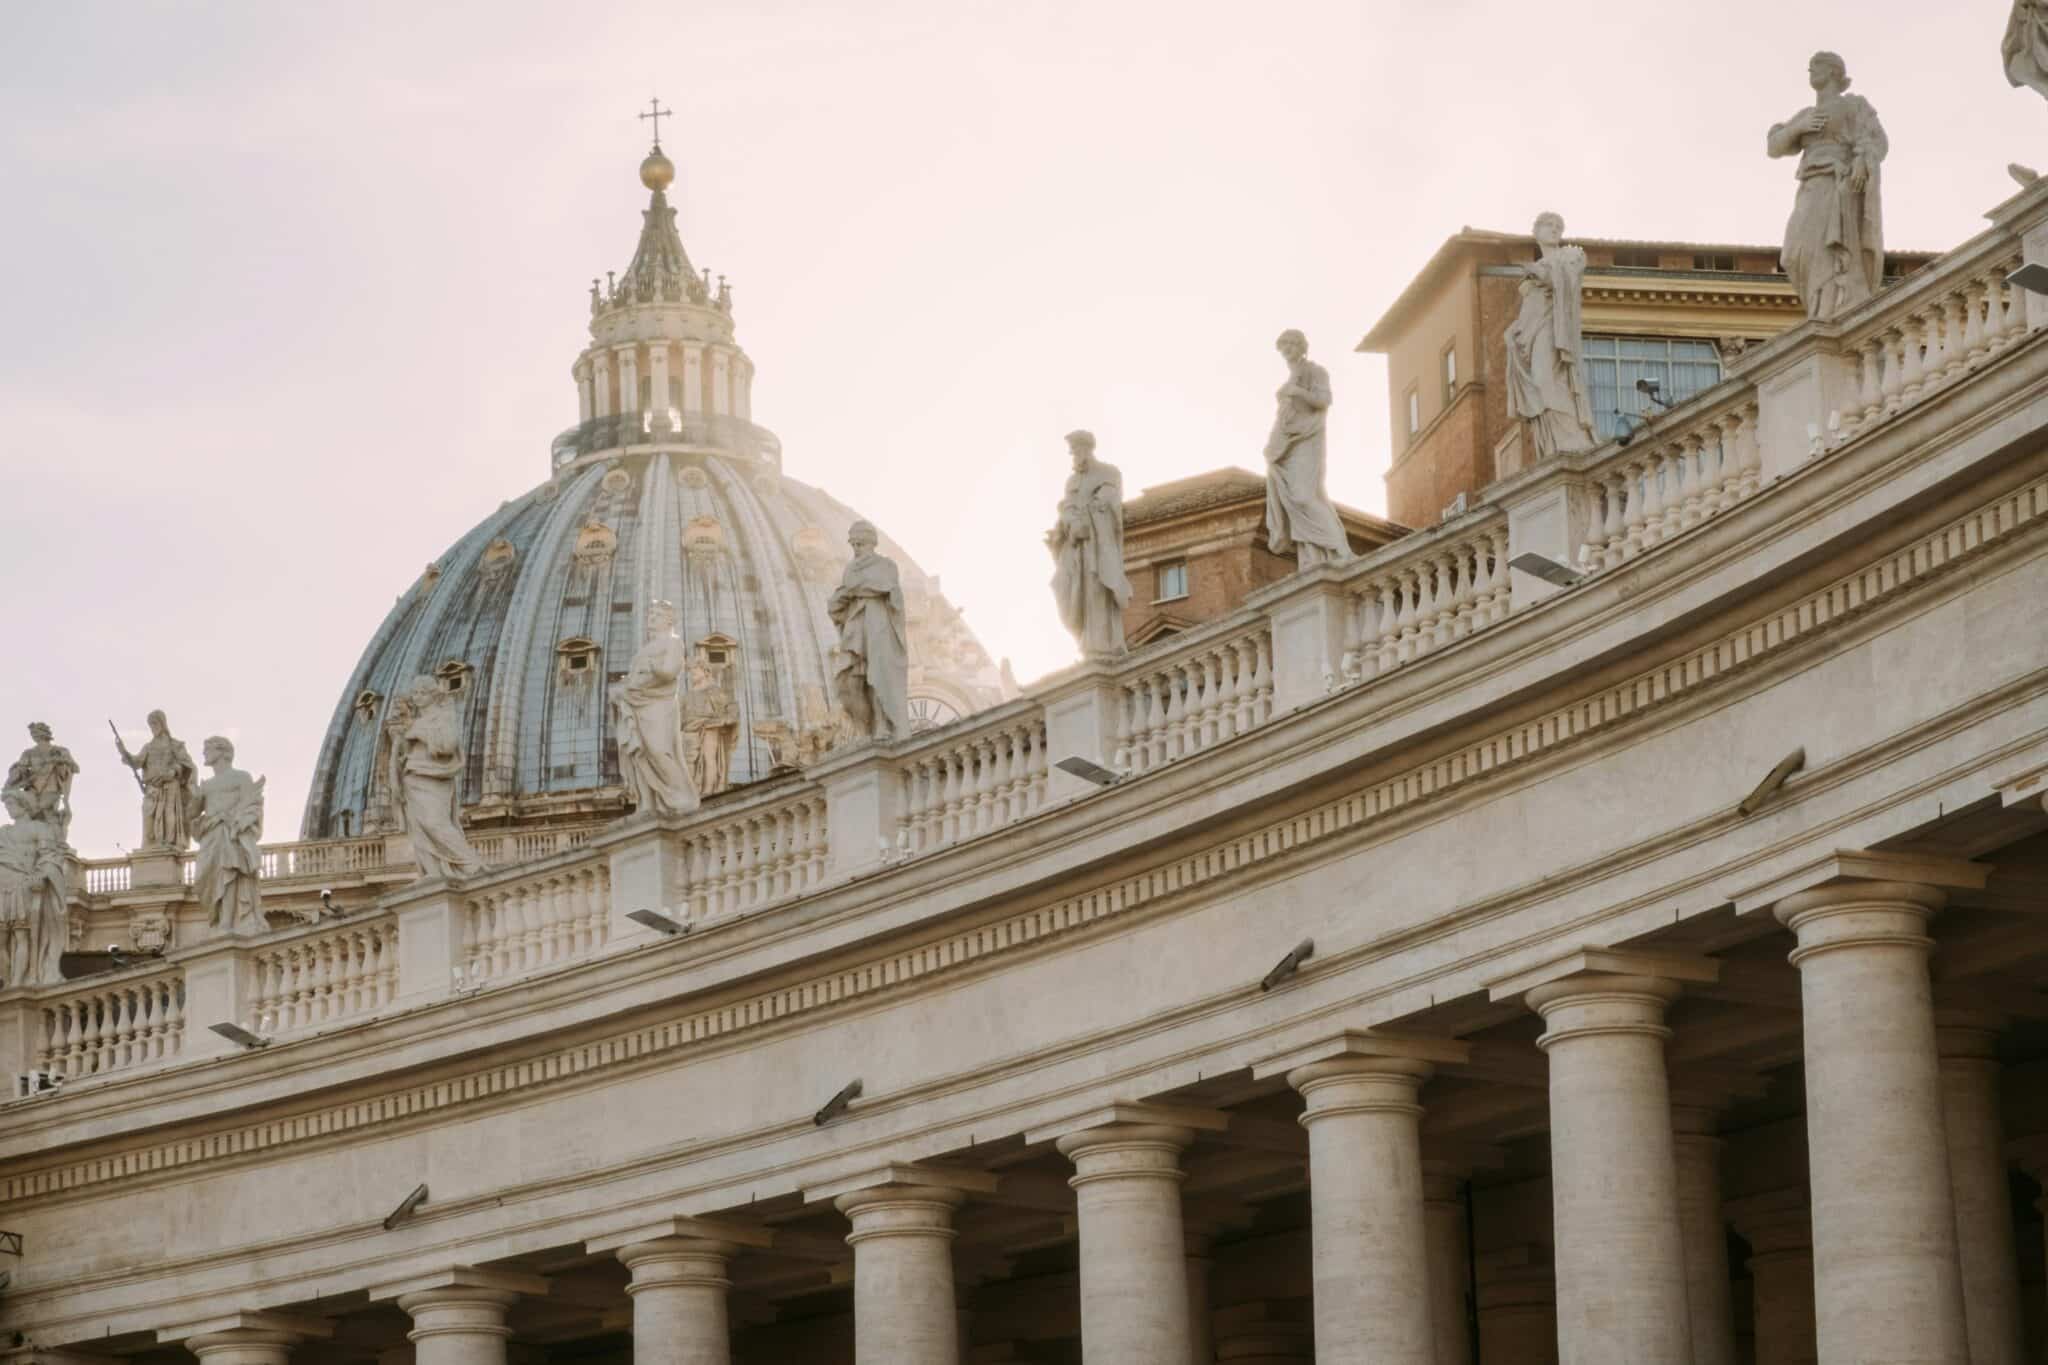 St. Peter's and the Vatican | Photo by Simone Savoldi on Unsplash